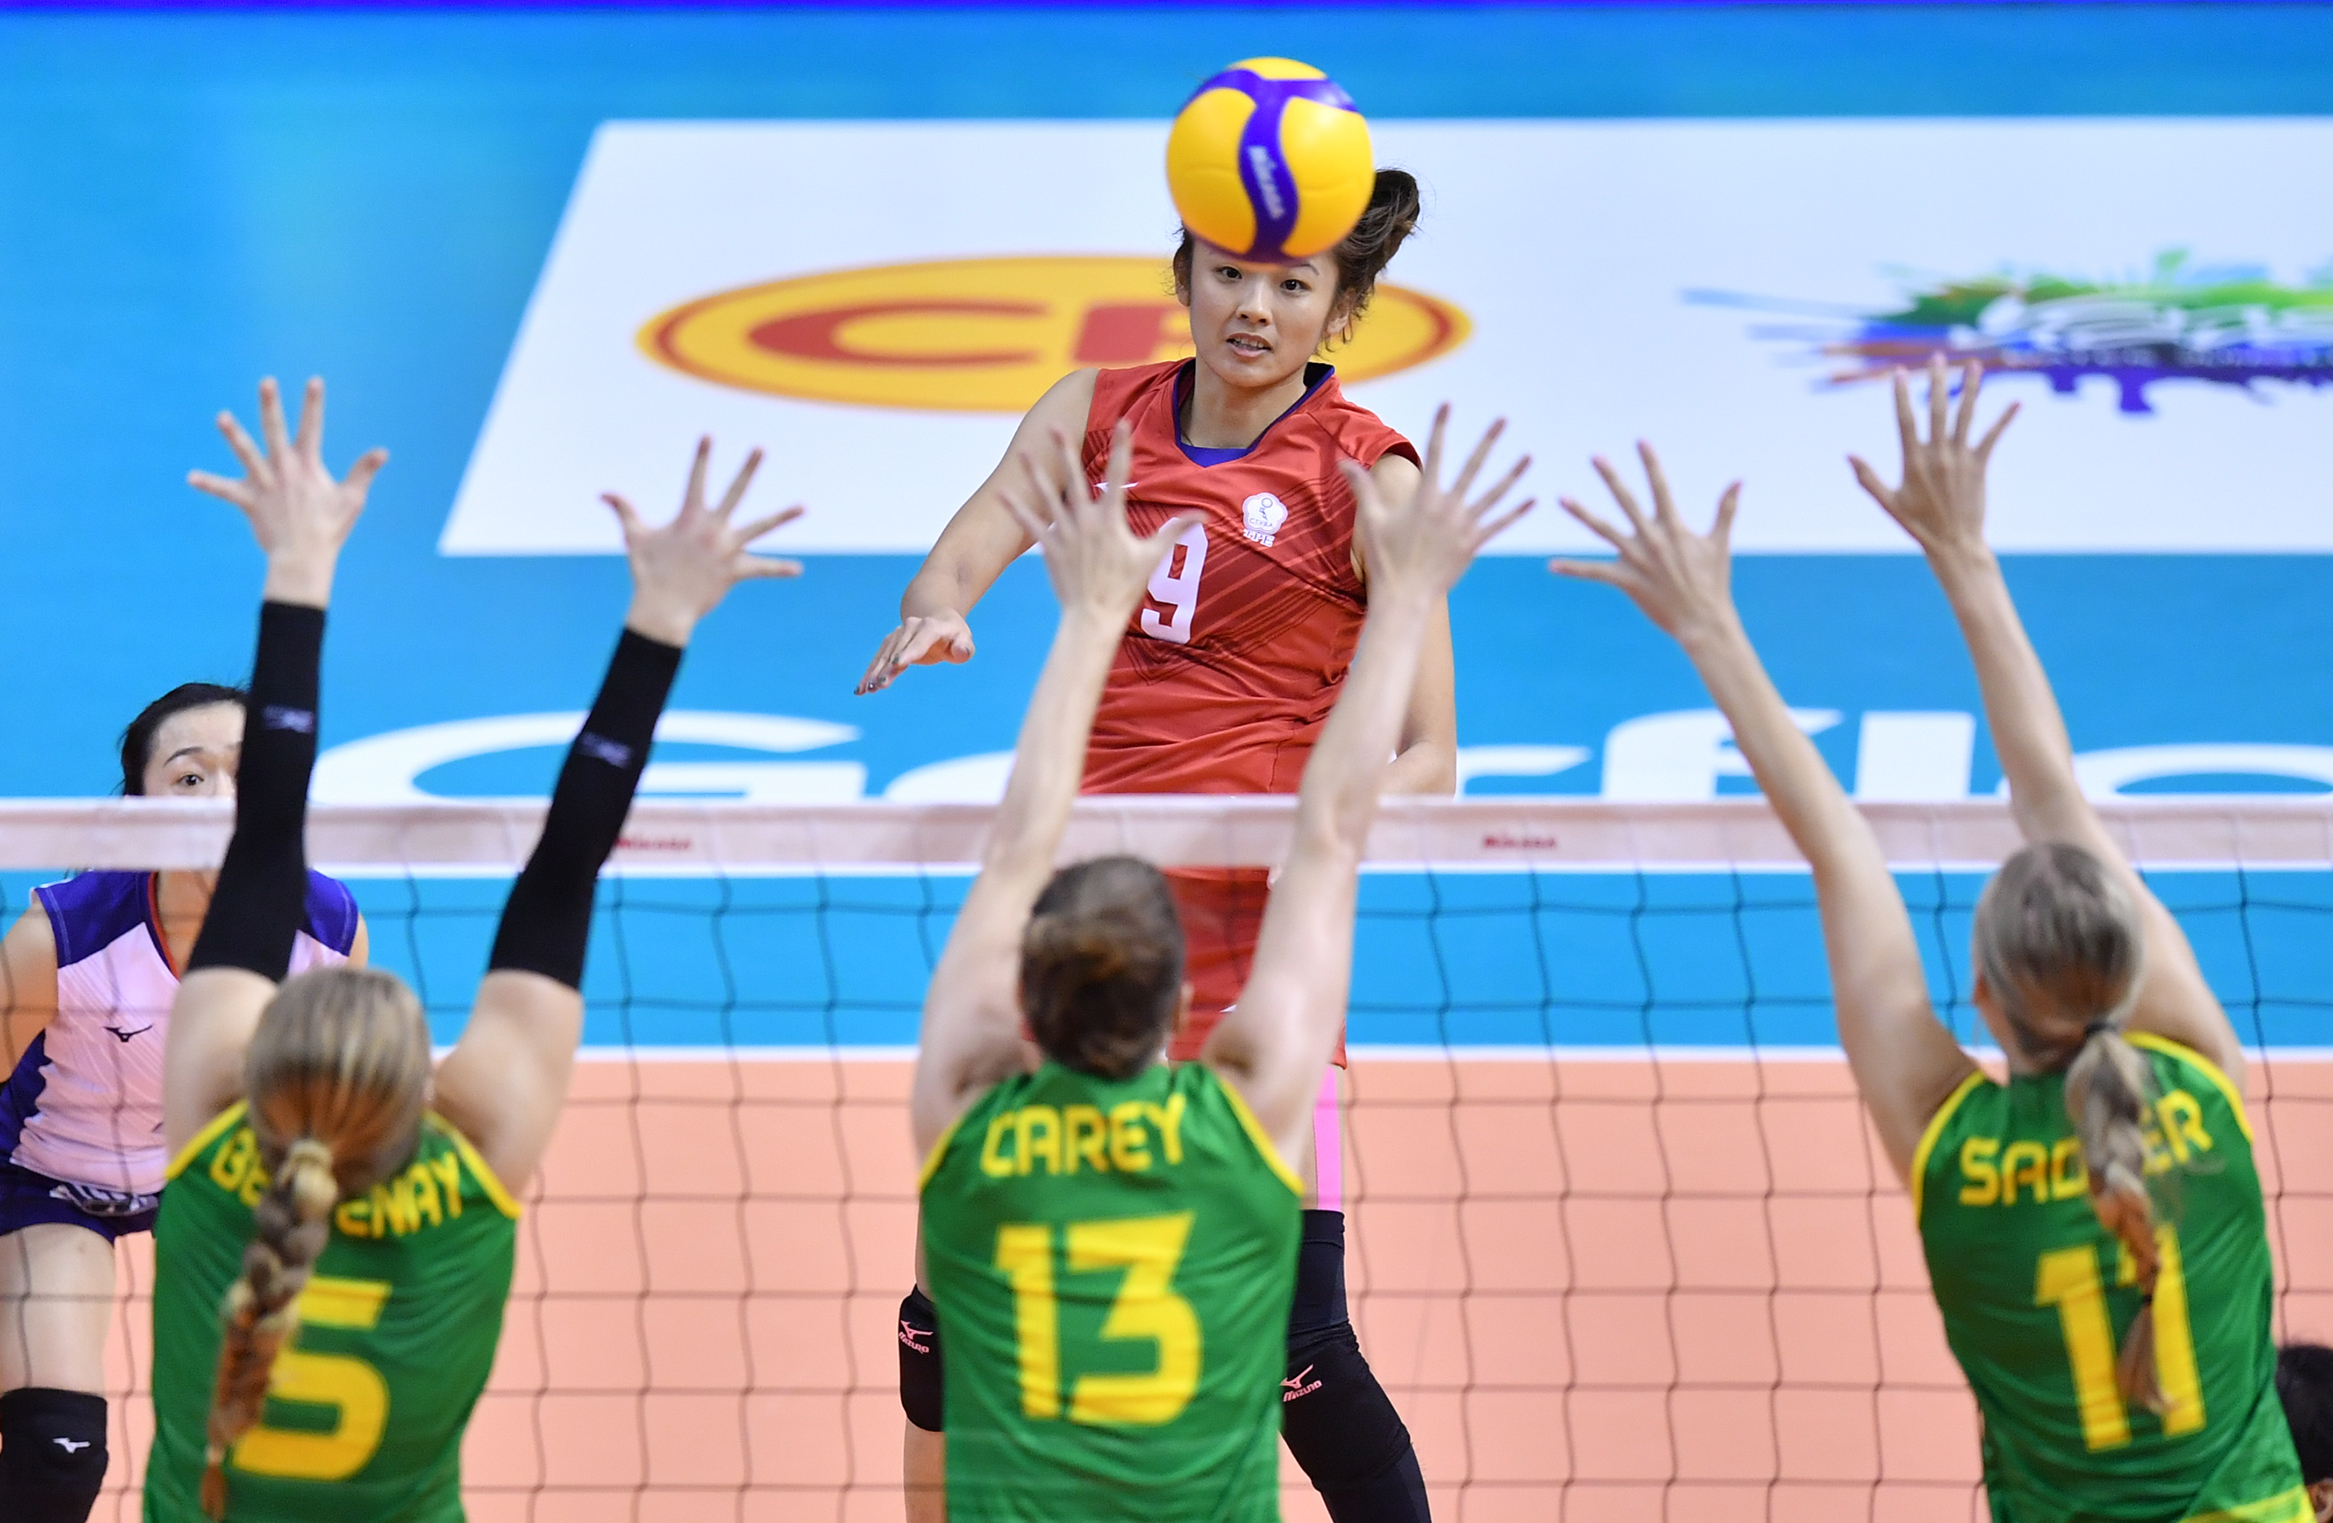 CHINESE TAIPEI PREVAIL OVER AUSTRALIA TO CAPTURE CRUCIAL WIN AT AVC WOMEN’S TOKYO VOLLEYBALL QUALIFICATION